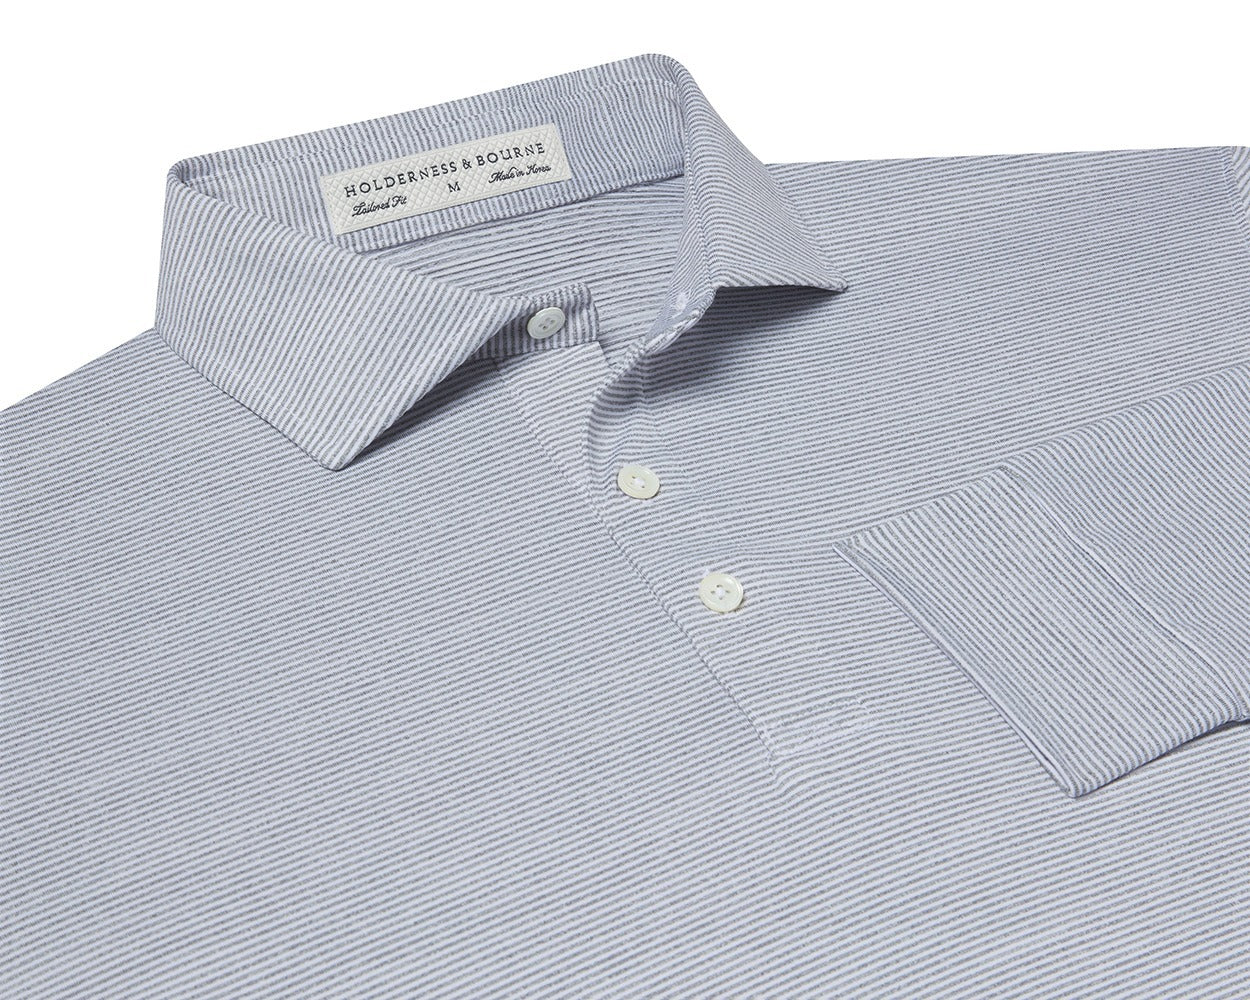 Folded Holderness and Bourne grey and white striped polo shirt.